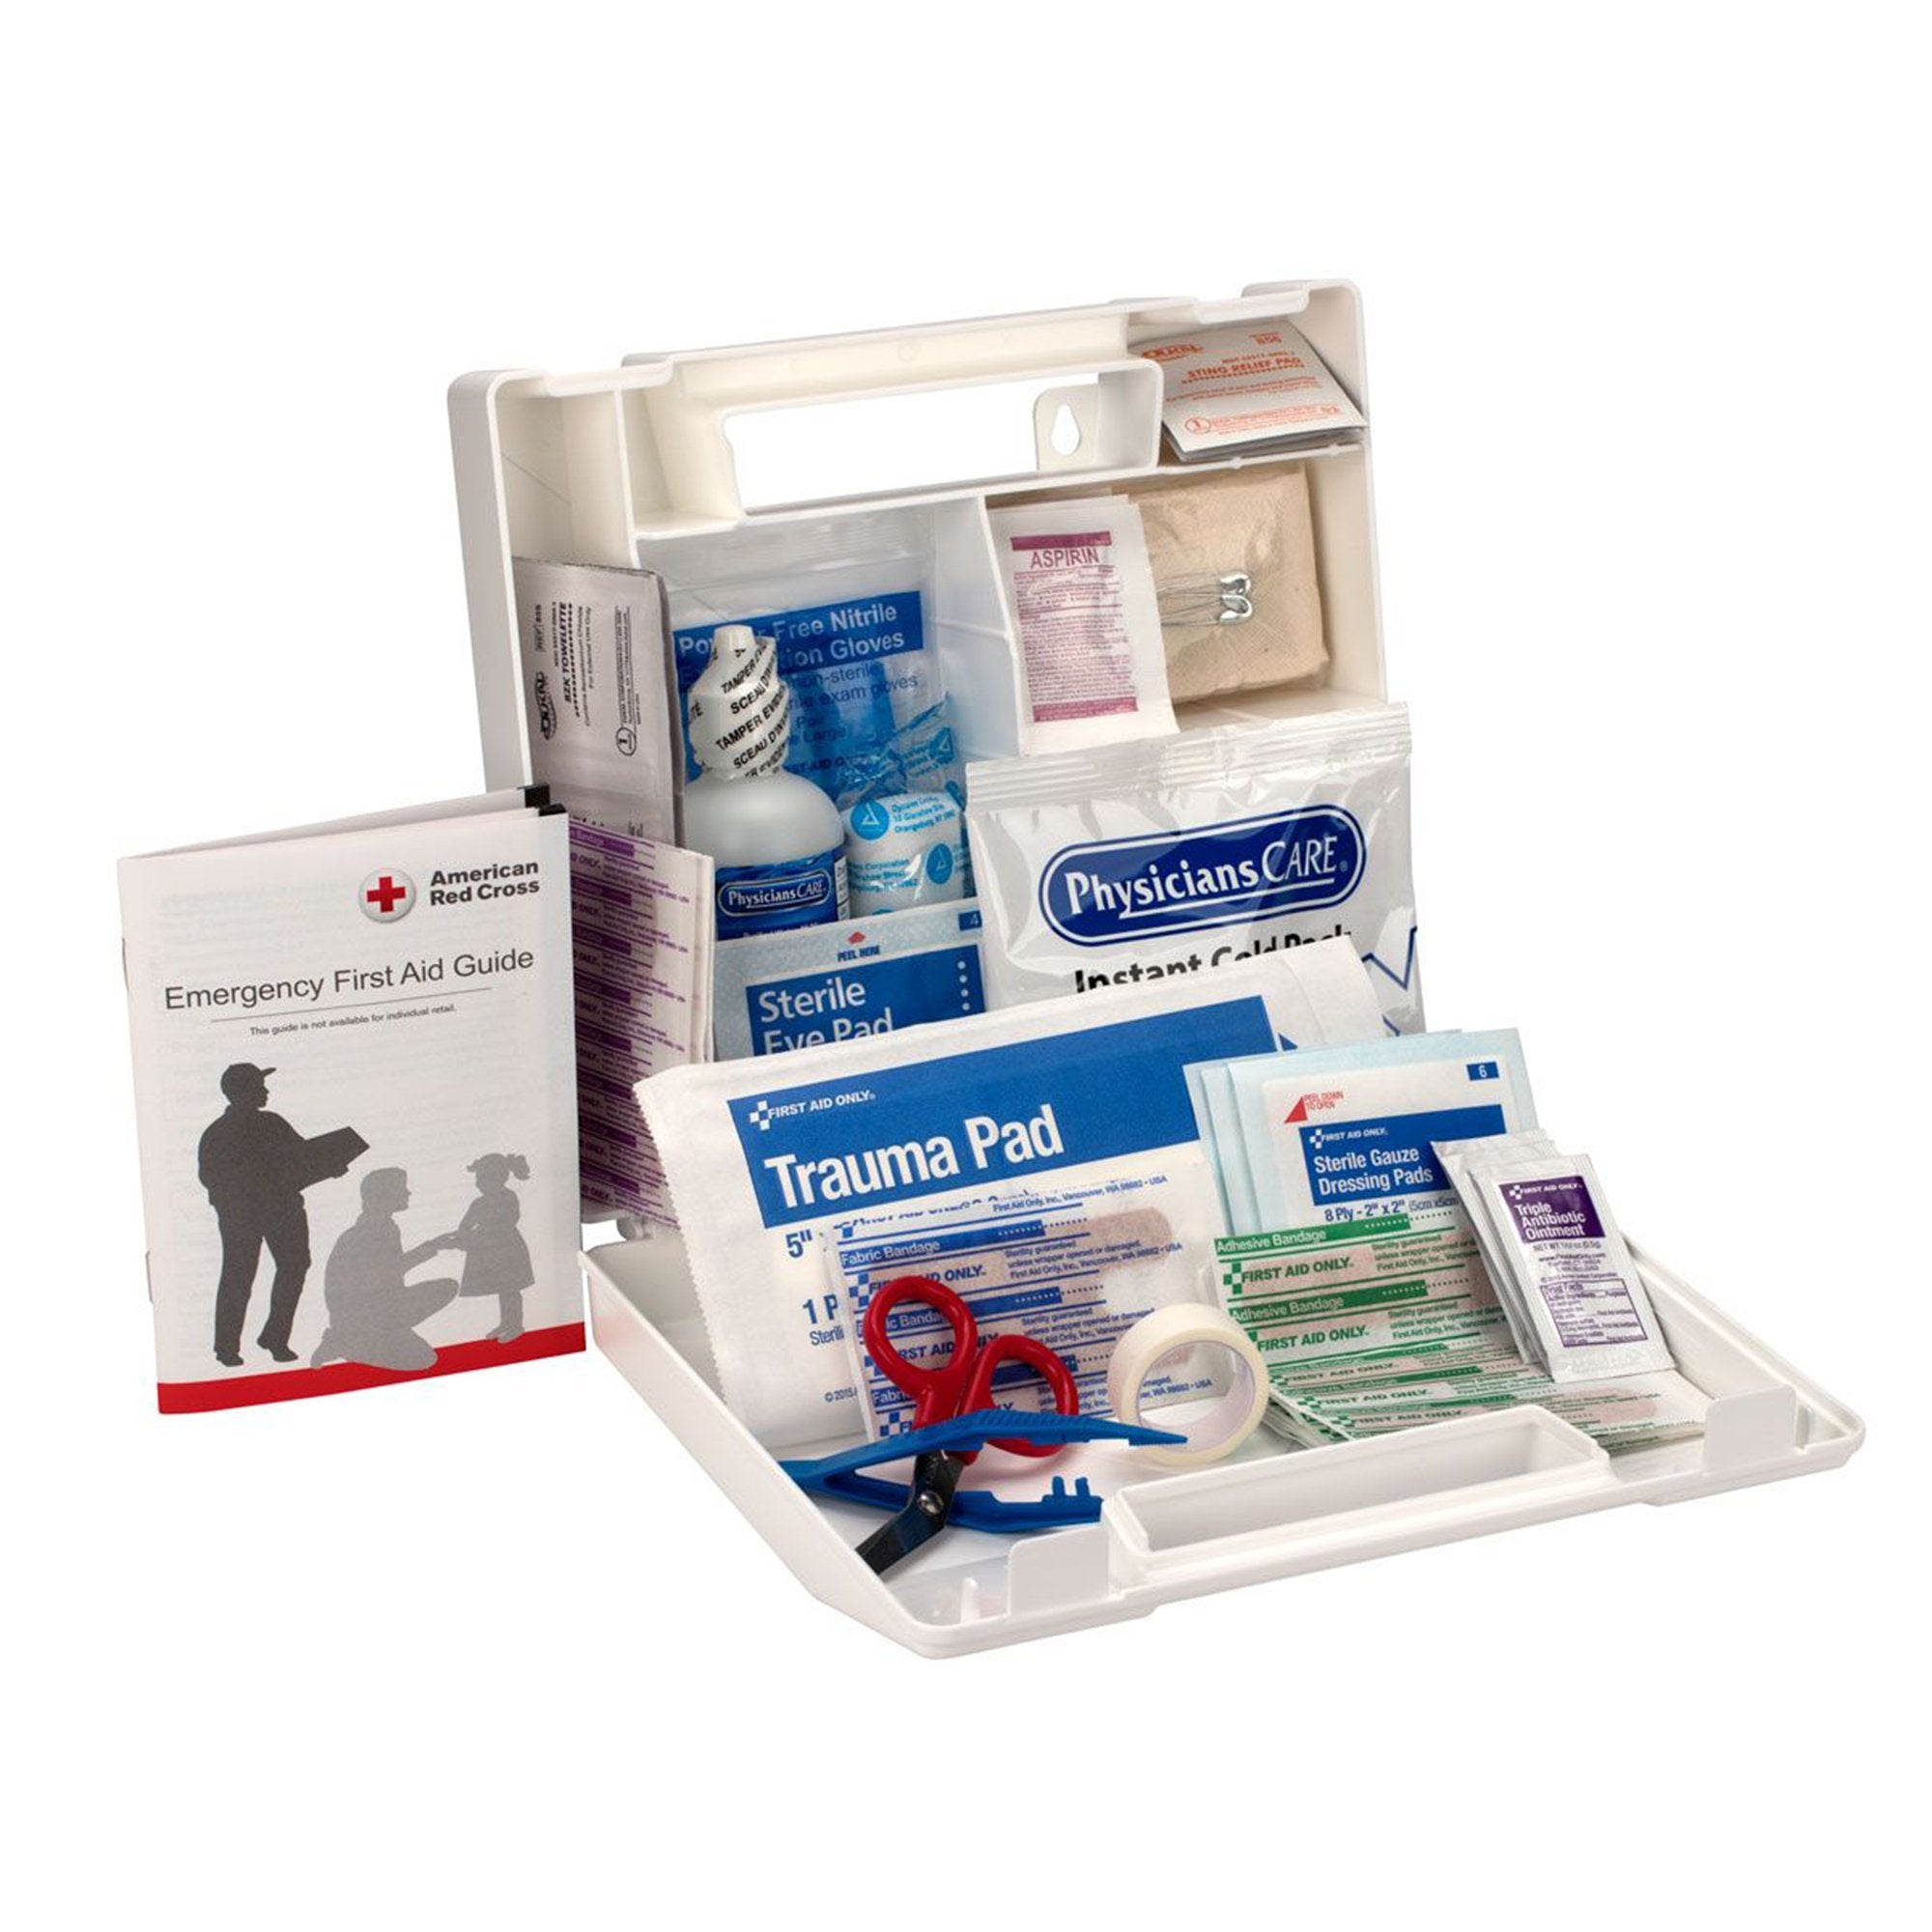 First Aid Kit First Aid Only 25 Person Plastic Case